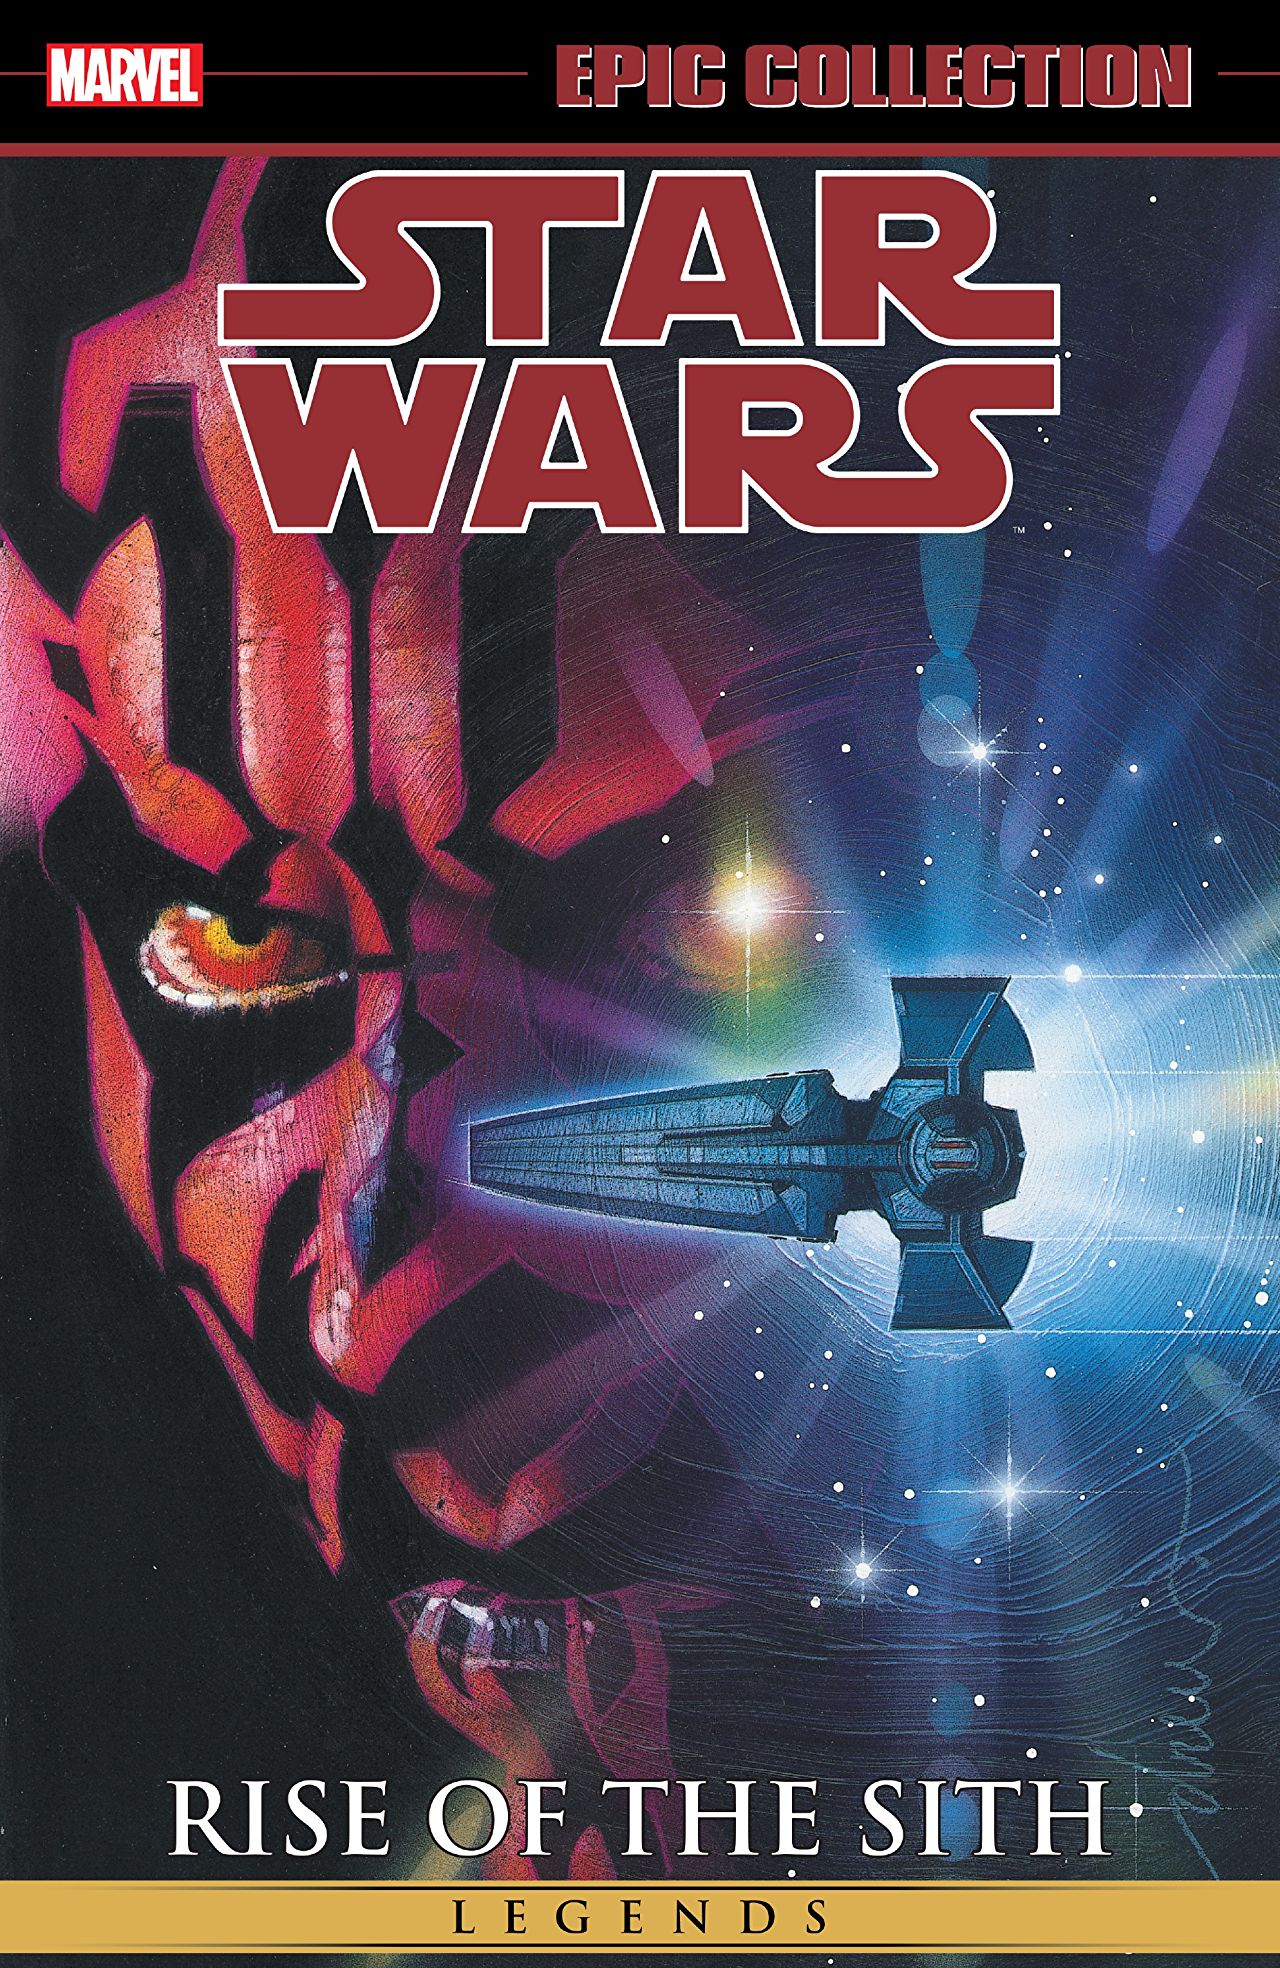 Star Wars Legends Epic Collection Graphic Novel Volume 2 Rise of the Sith